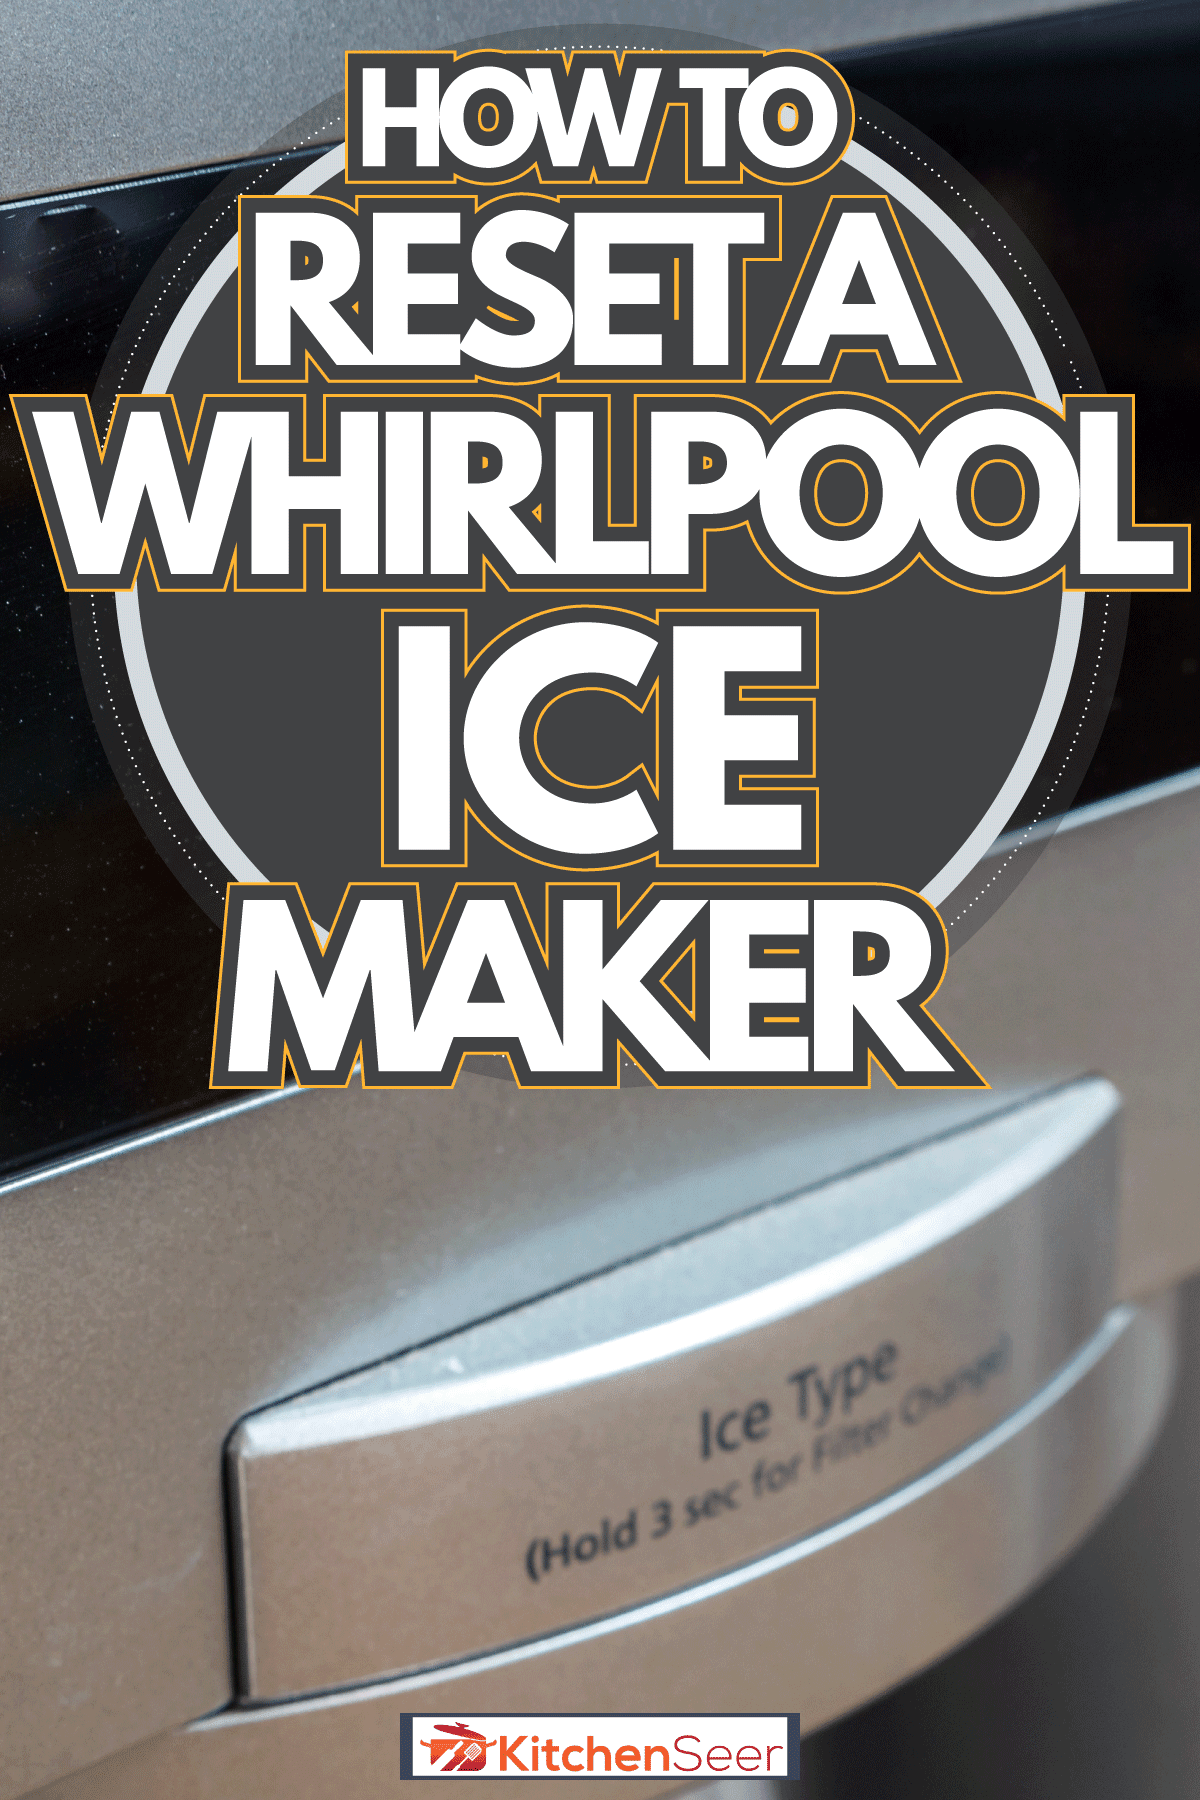 Detail with refrigerator freezer of kitchen appliance, How To Reset A Whirlpool Ice Maker